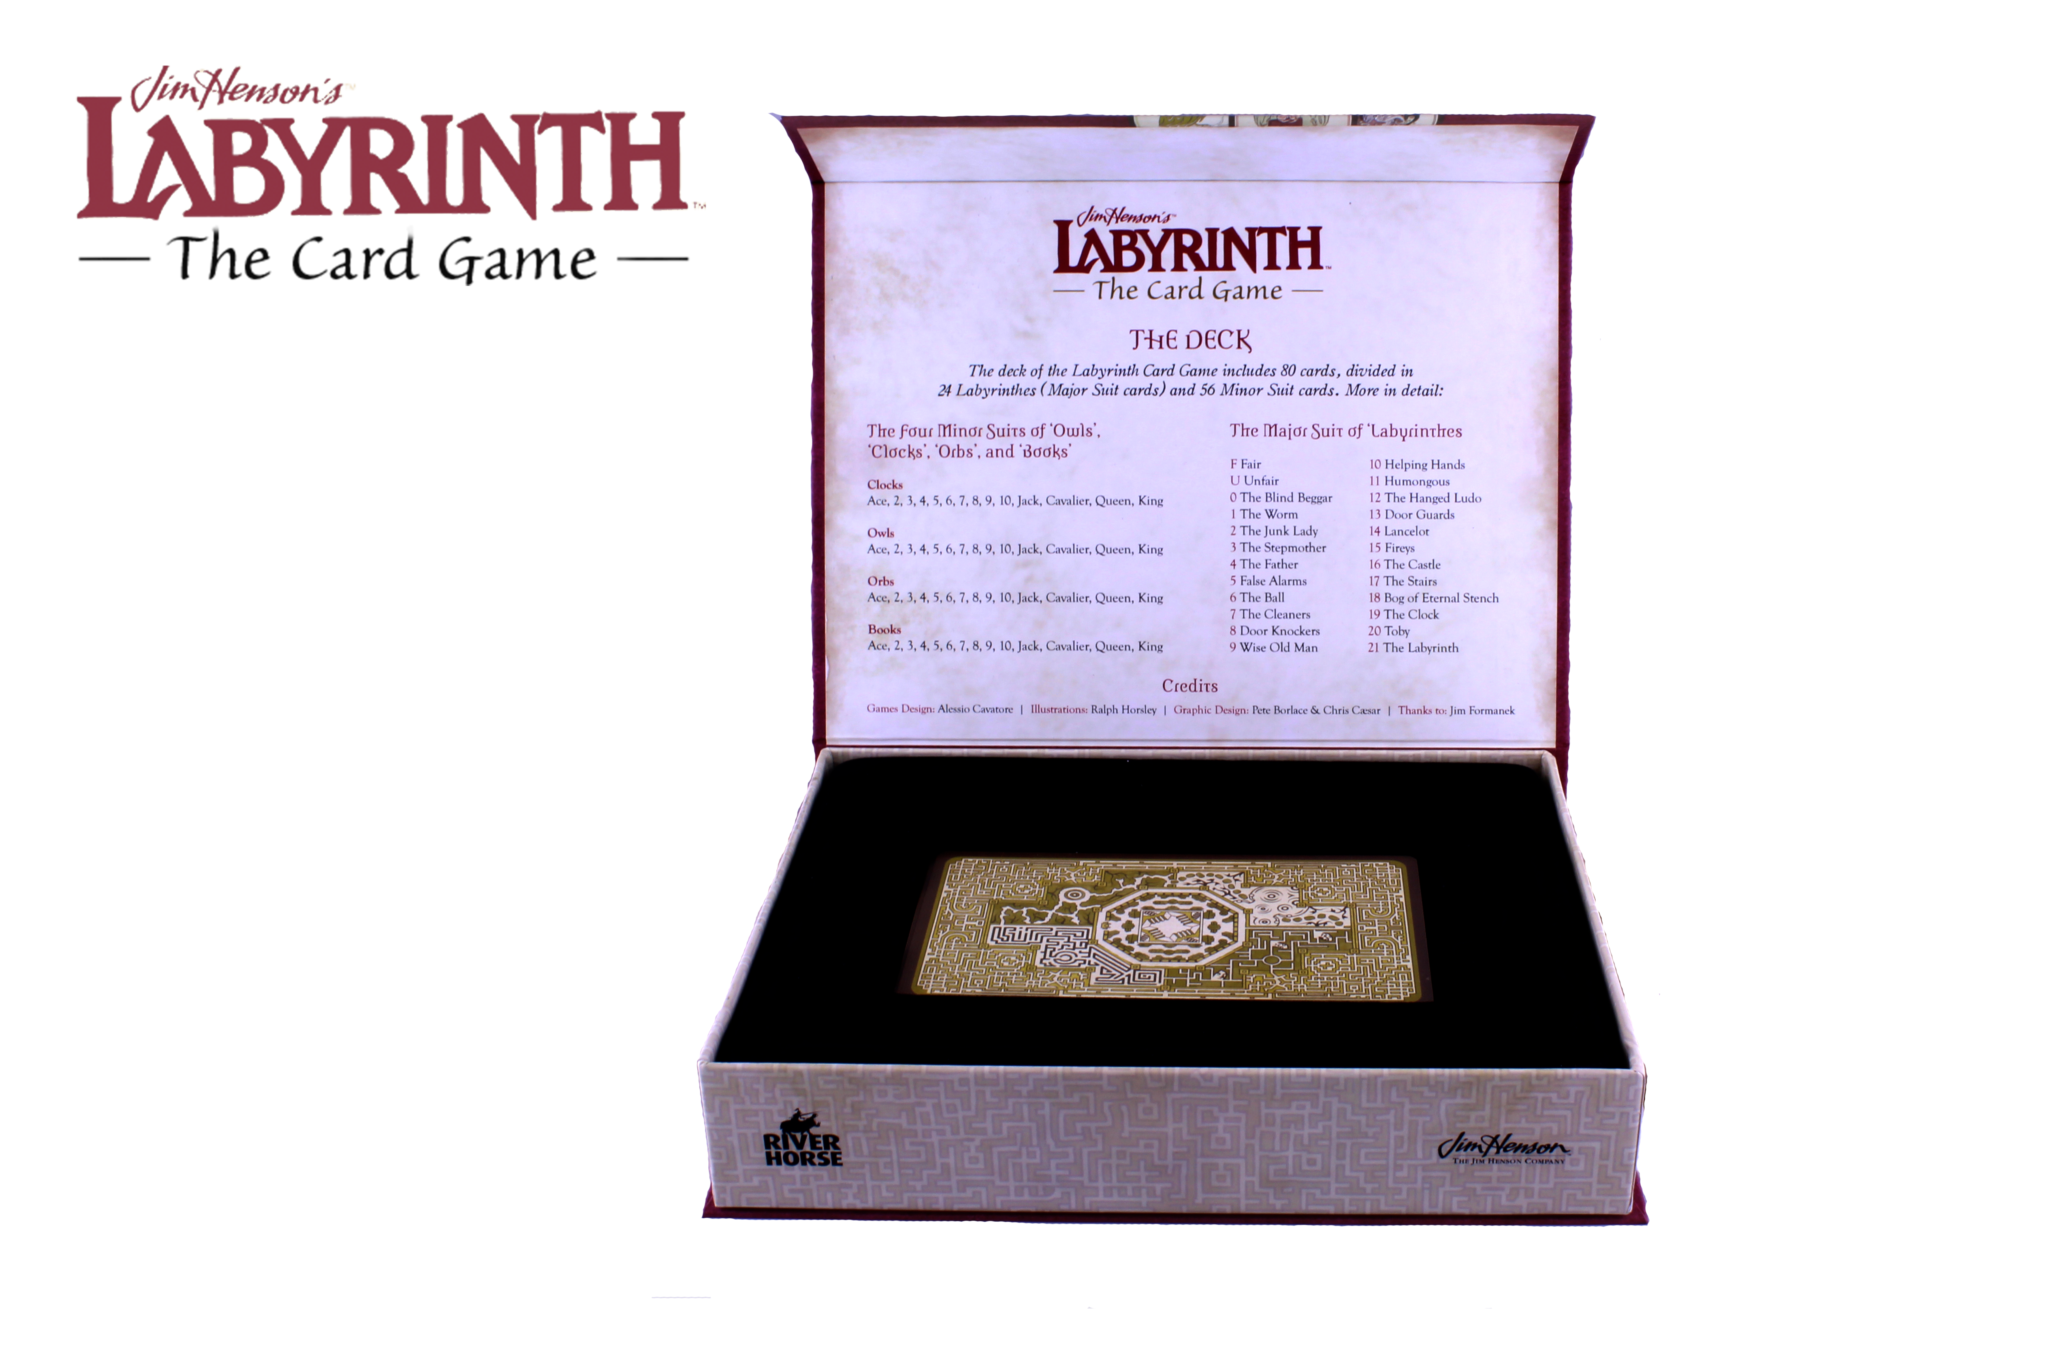 Jim Henson's Labyrinth the Card Game by River Horse